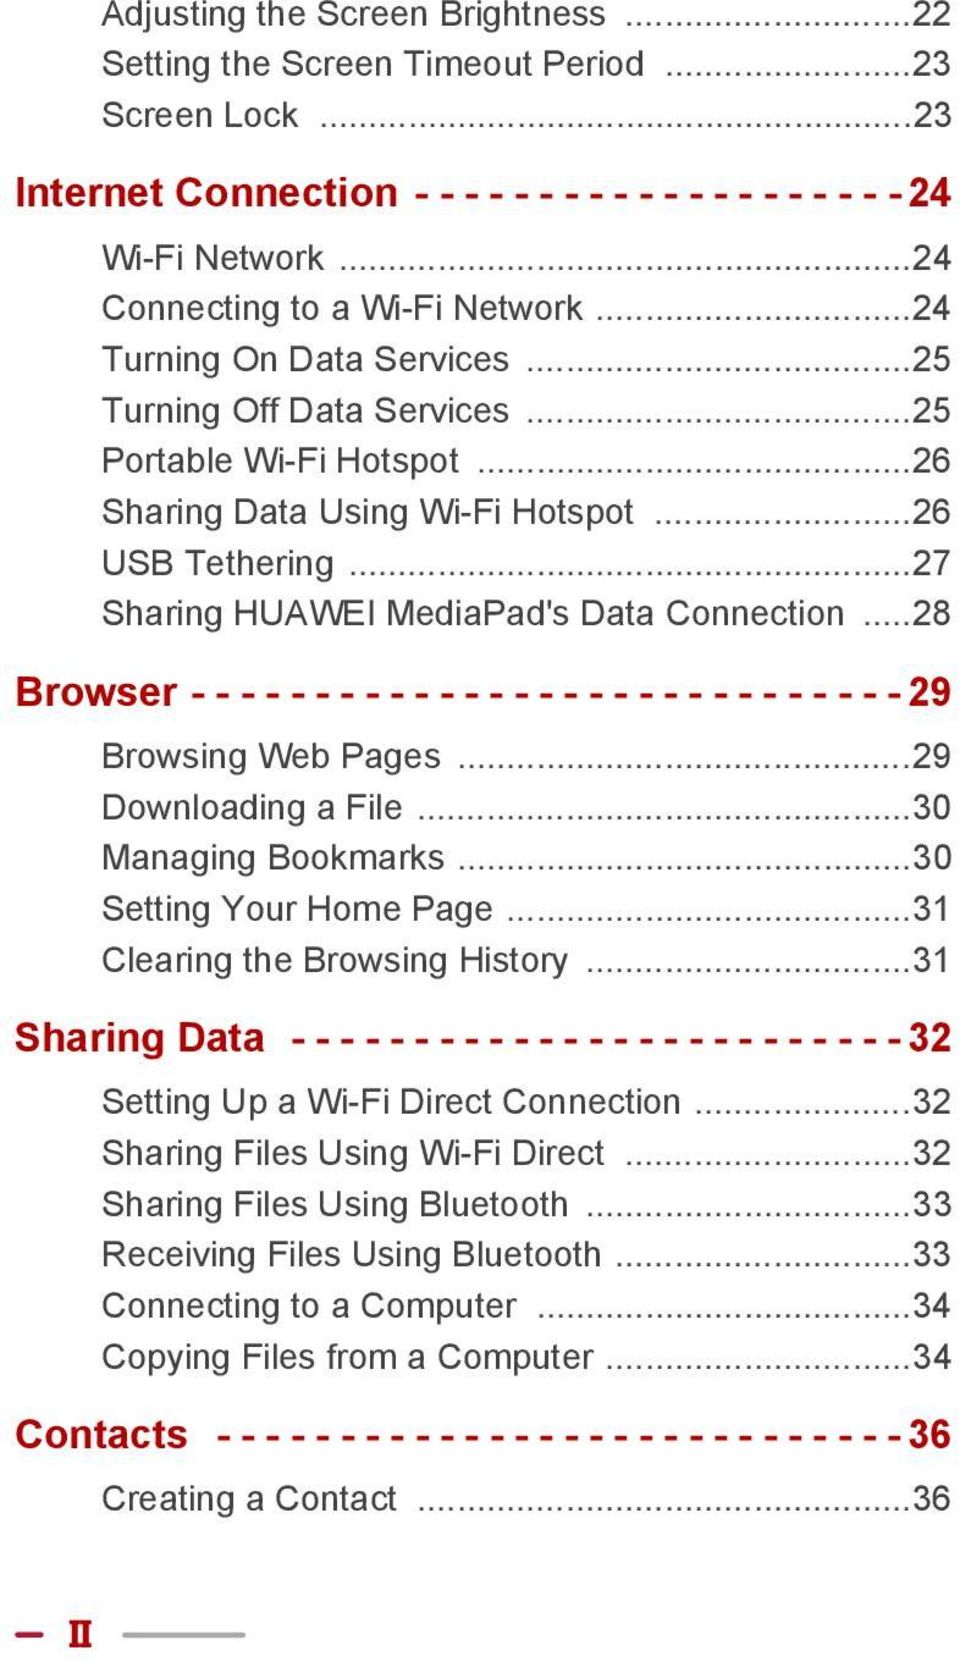 ..27 Sharing HUAWEI MediaPad's Data Connection...28 Browser - - - - - - - - - - - - - - - - - - - - - - - - - - - - - 29 Browsing Web Pages...29 Downloading a File...30 Managing Bookmarks.